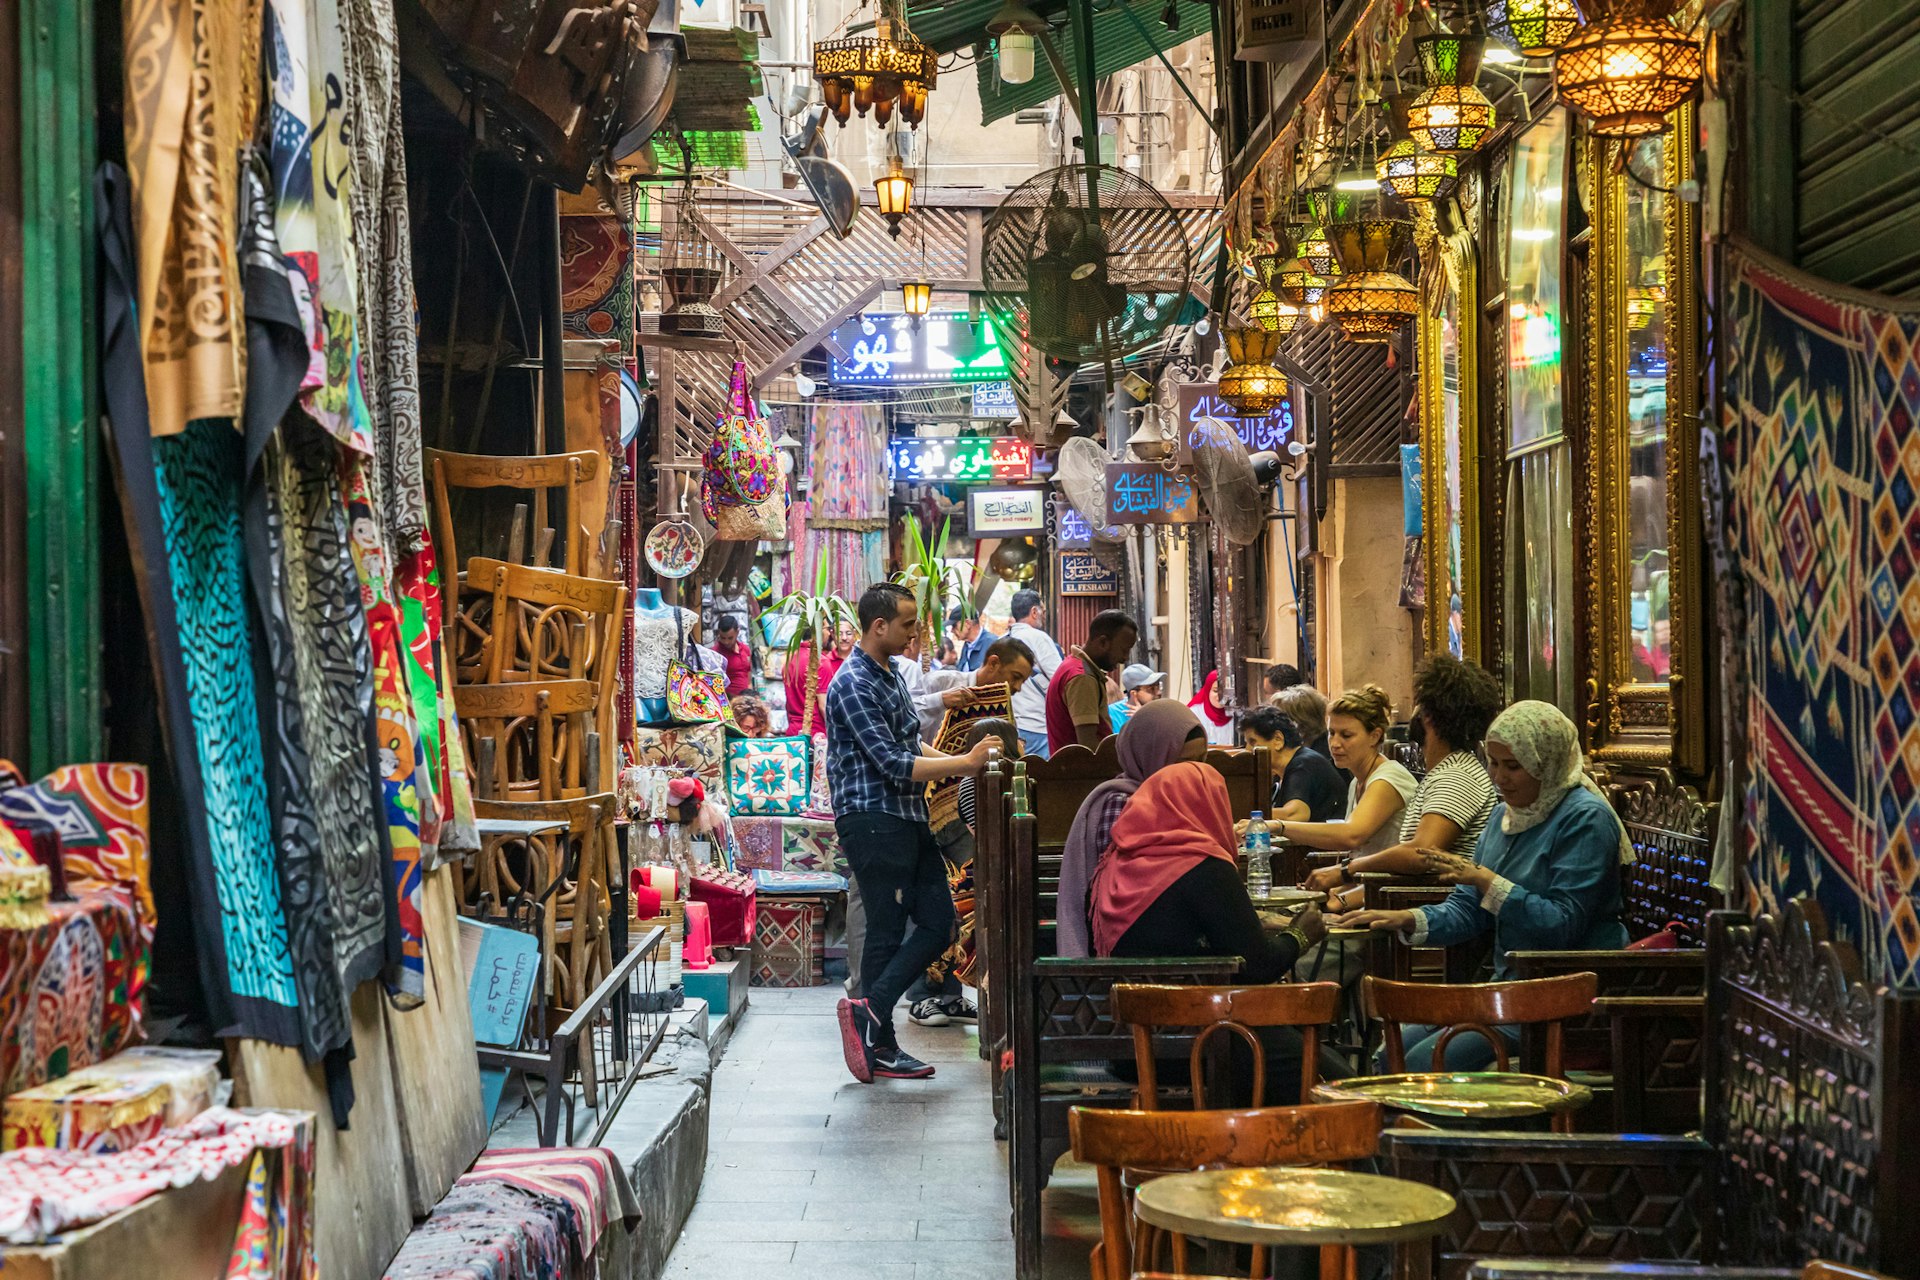 People sit at tables outside a coffee shop in a busy souk